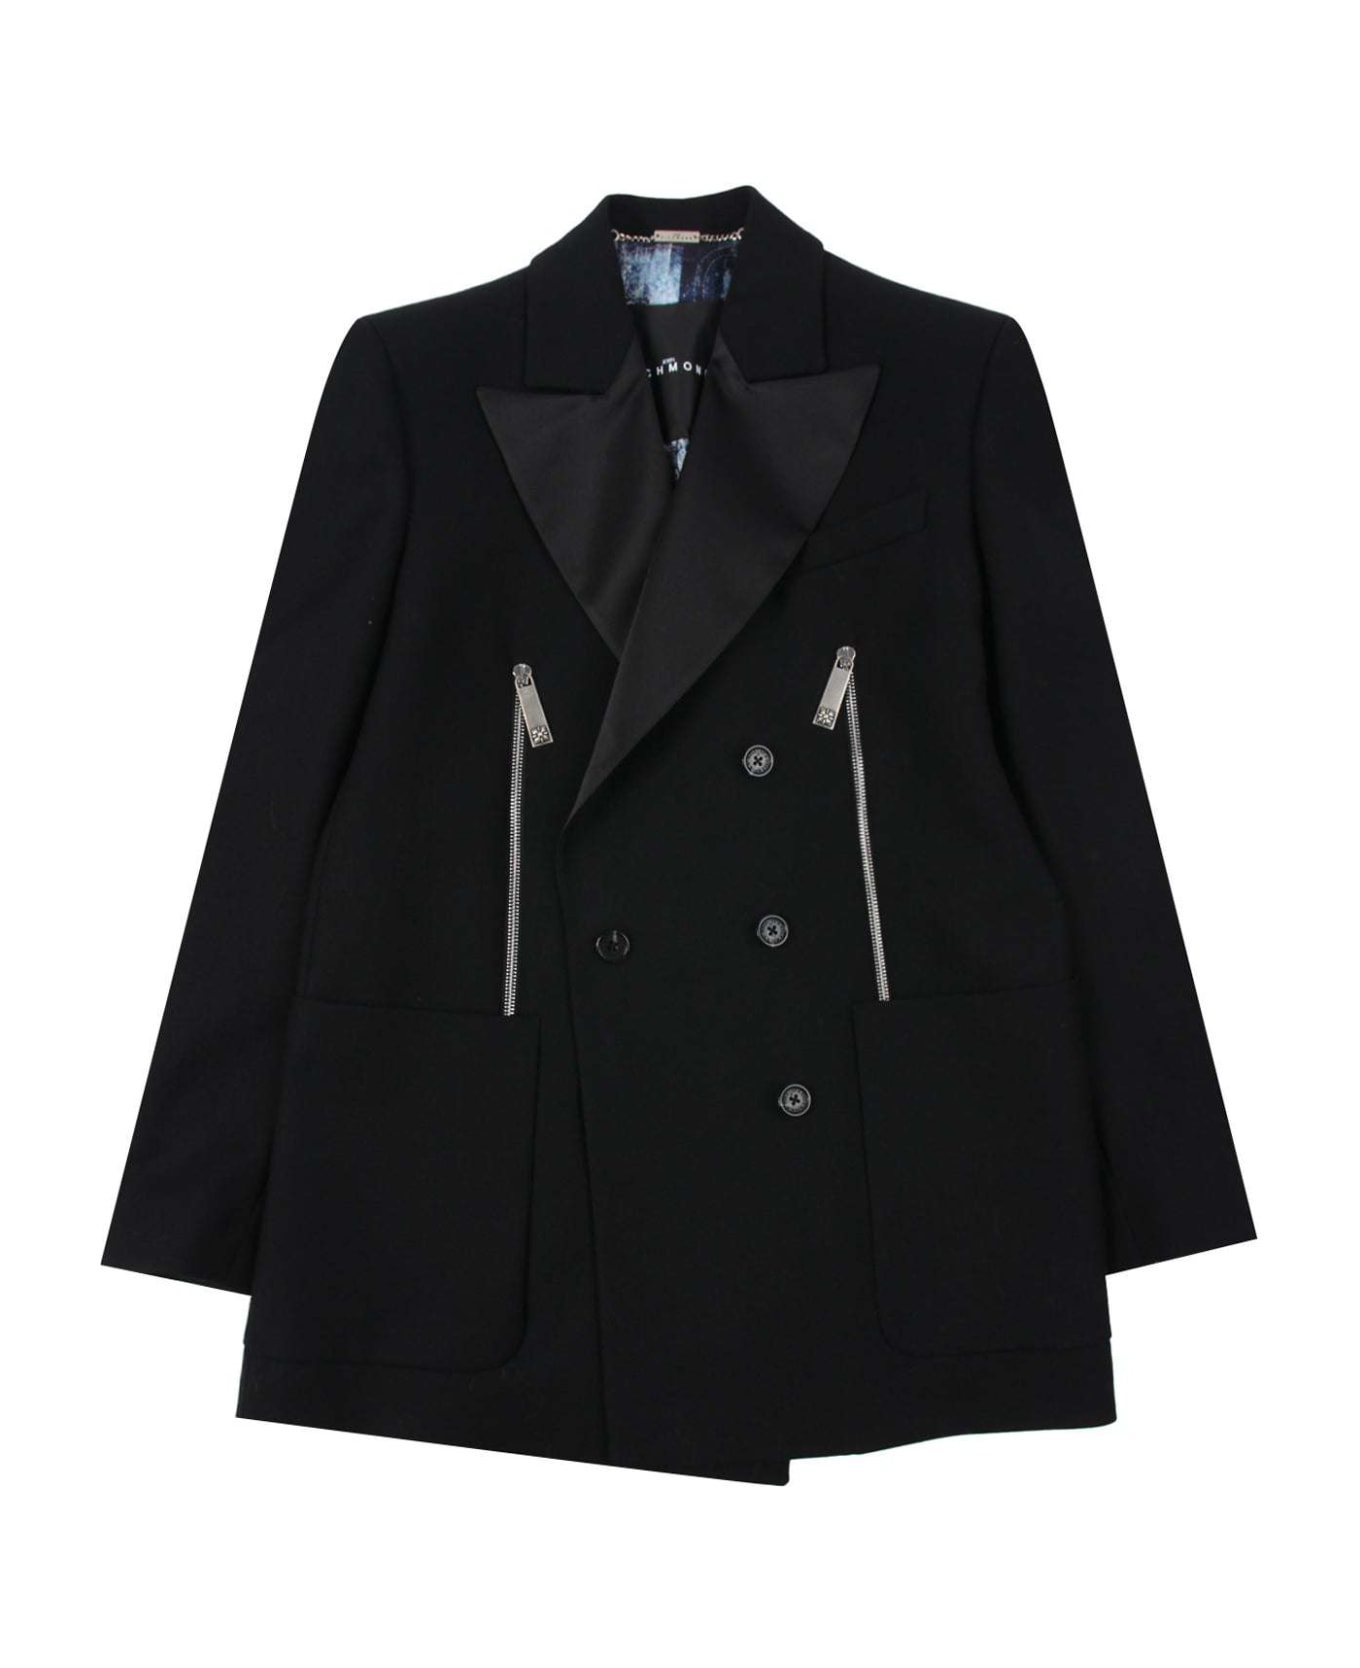 John Richmond Double-breasted Blazer In 100% Virgin Wool With Contrasting Collar And Side Zips. - Nero コート